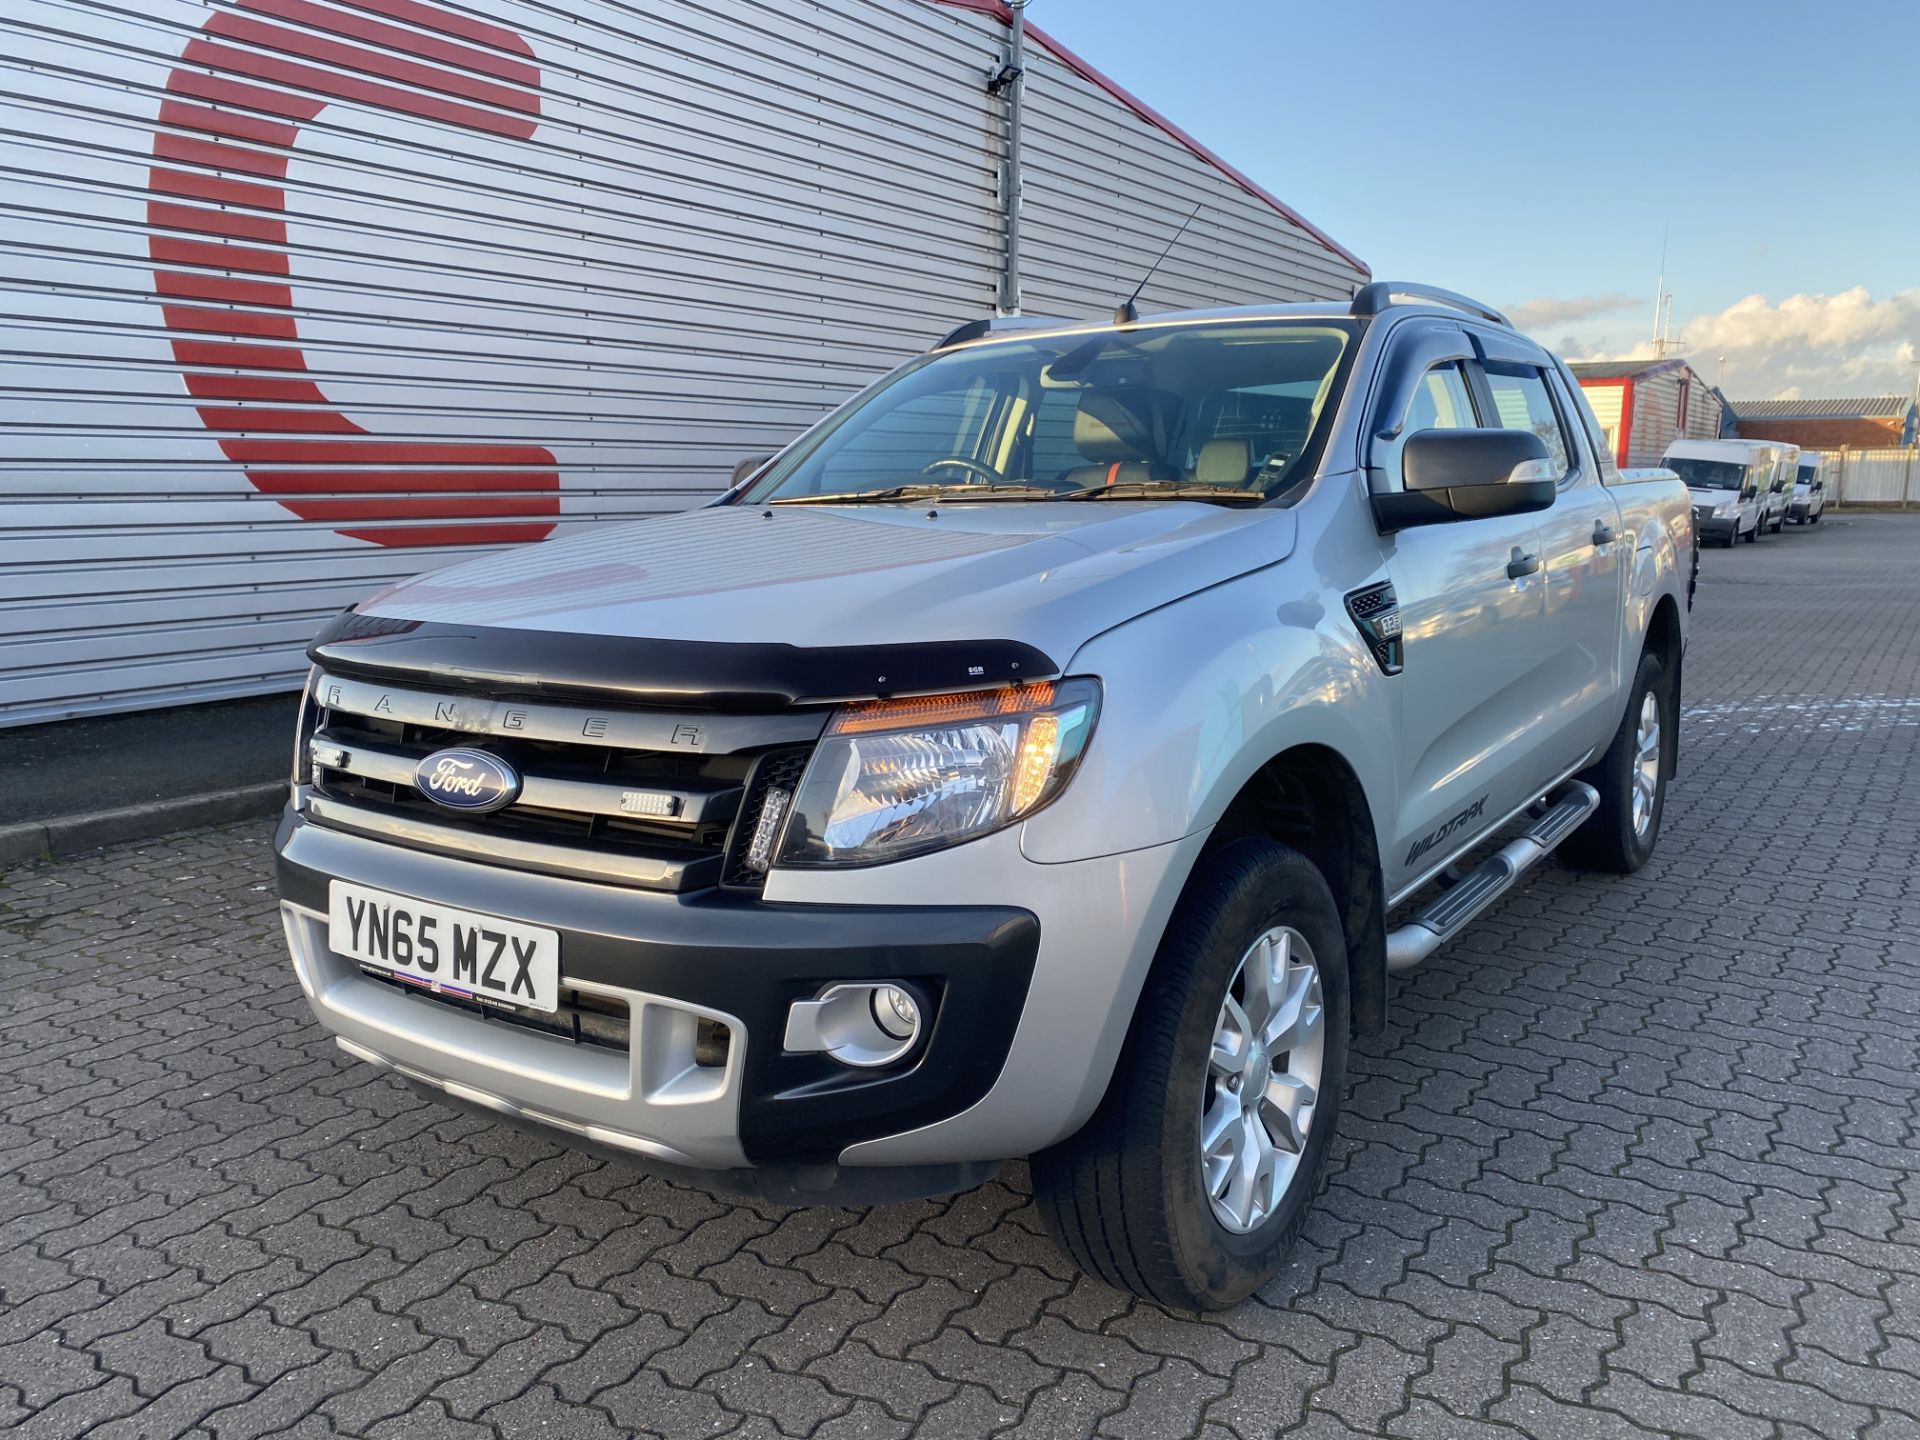 Ford Ranger Wildtrak 4 x 4 3.2 TDCI 6 Speed Automatic Double Cab Pick Up Truck, Silver - Image 3 of 30